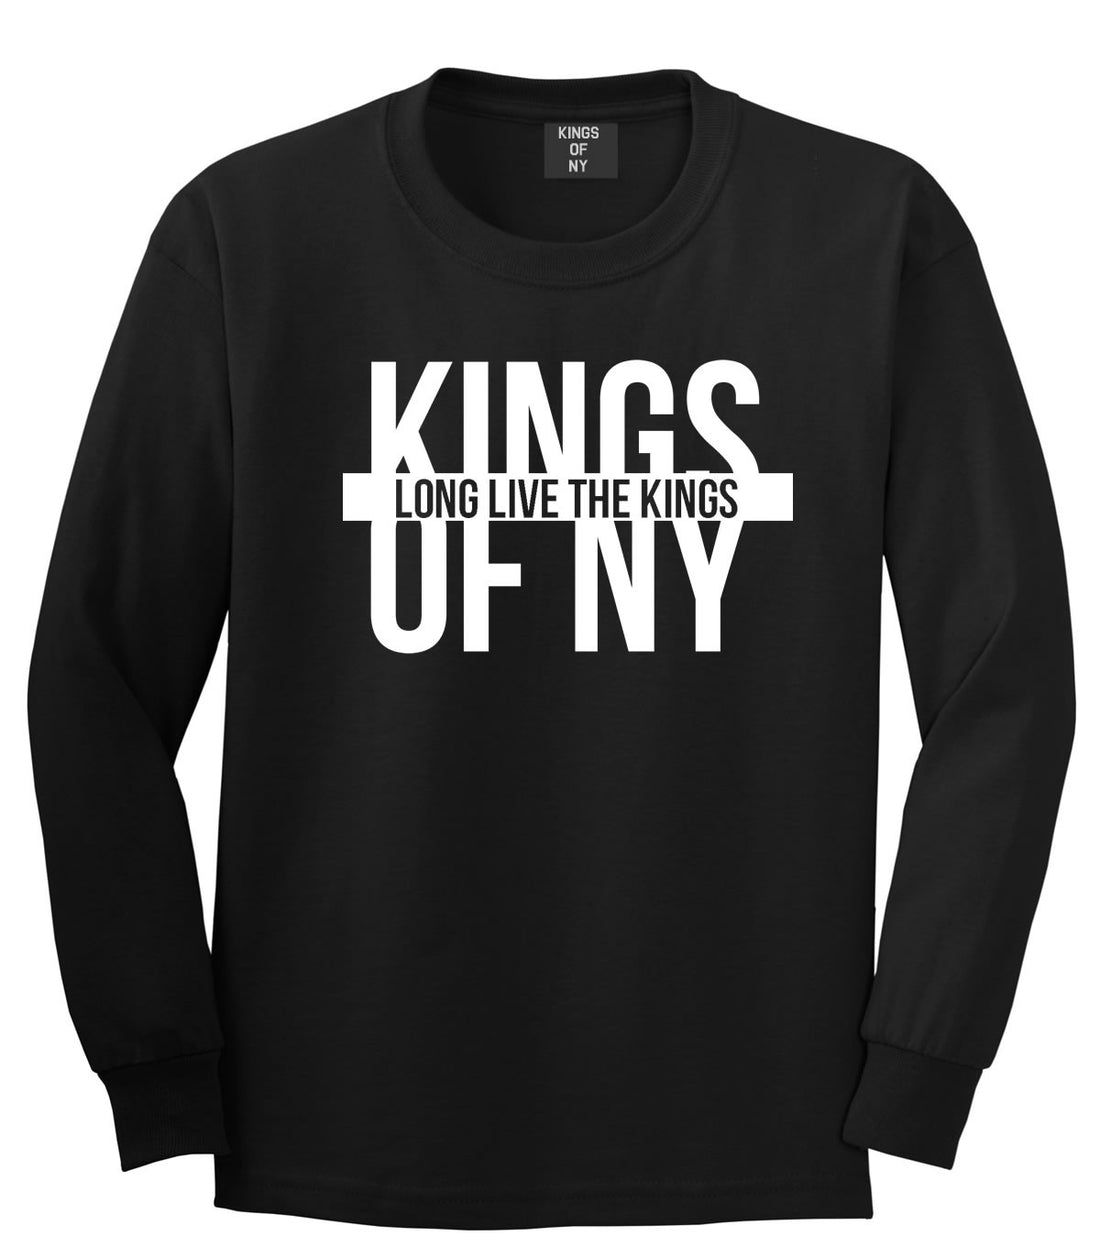 Long Live the Kings Long Sleeve T-Shirt in Black by Kings Of NY